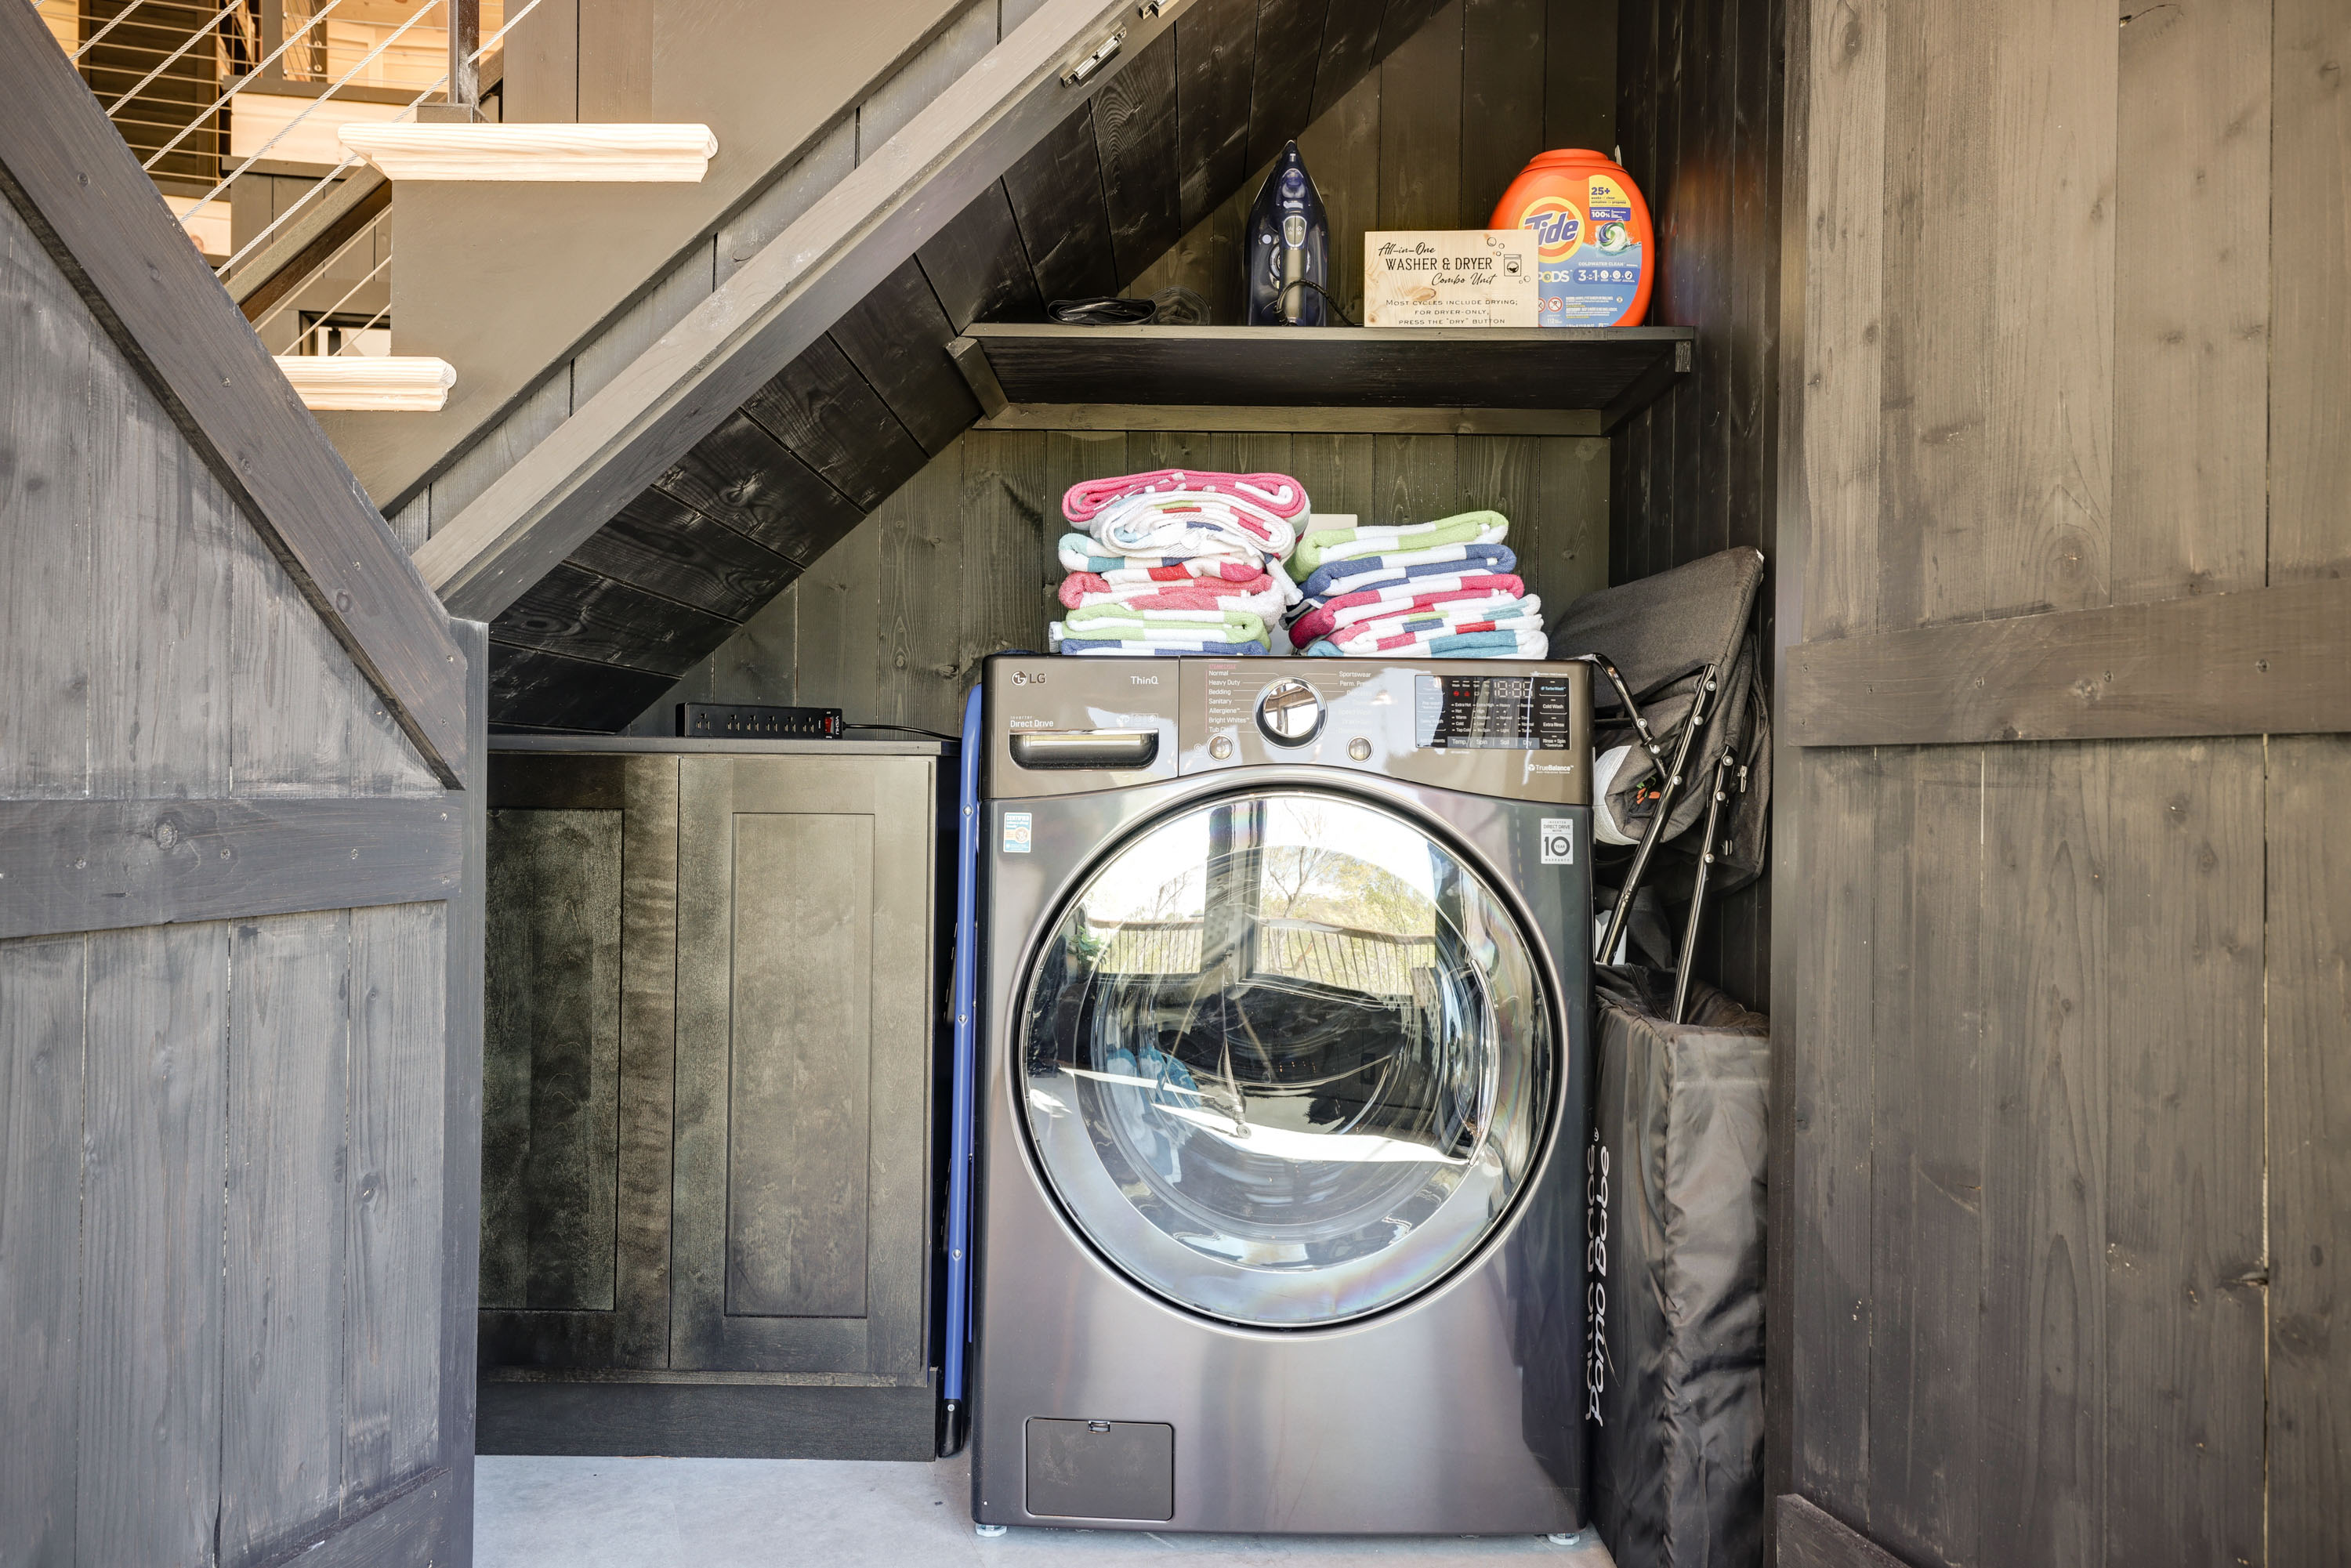 <span  class="uc_style_uc_tiles_grid_image_elementor_uc_items_attribute_title" style="color:#ffffff;">Under Stairs Storage, Washer-Dryer Combo, Hot Tub Towels, Crib, High Chair - Skyline Yurt</span>